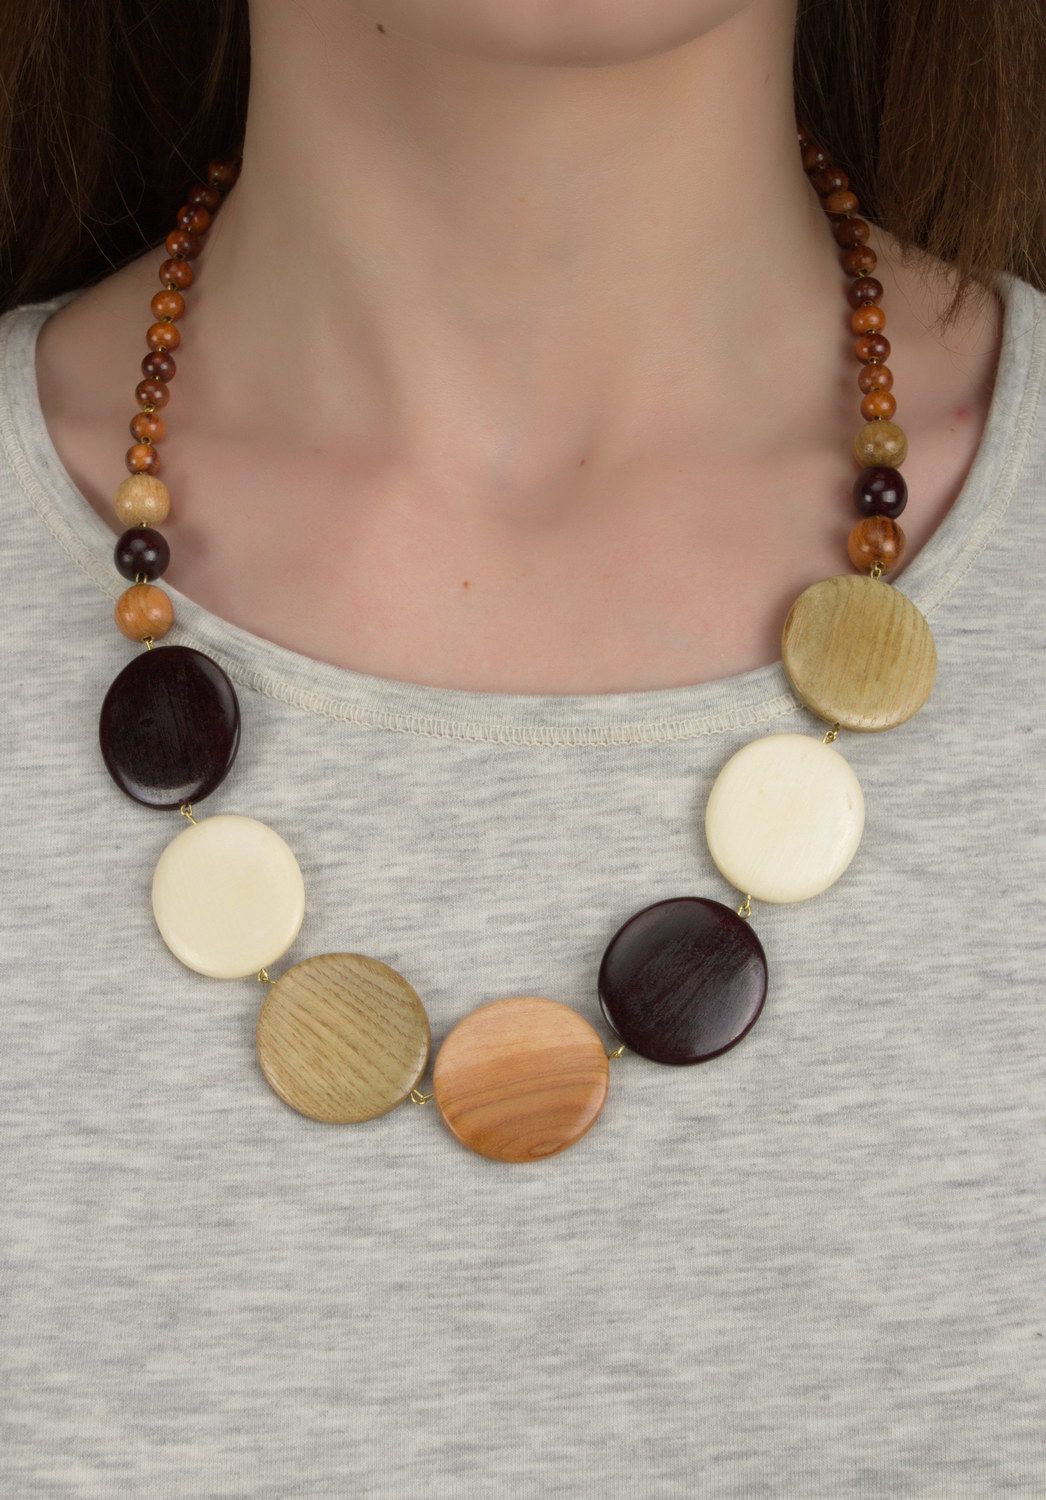 Necklace made of different kinds of wood with a clasp photo 4